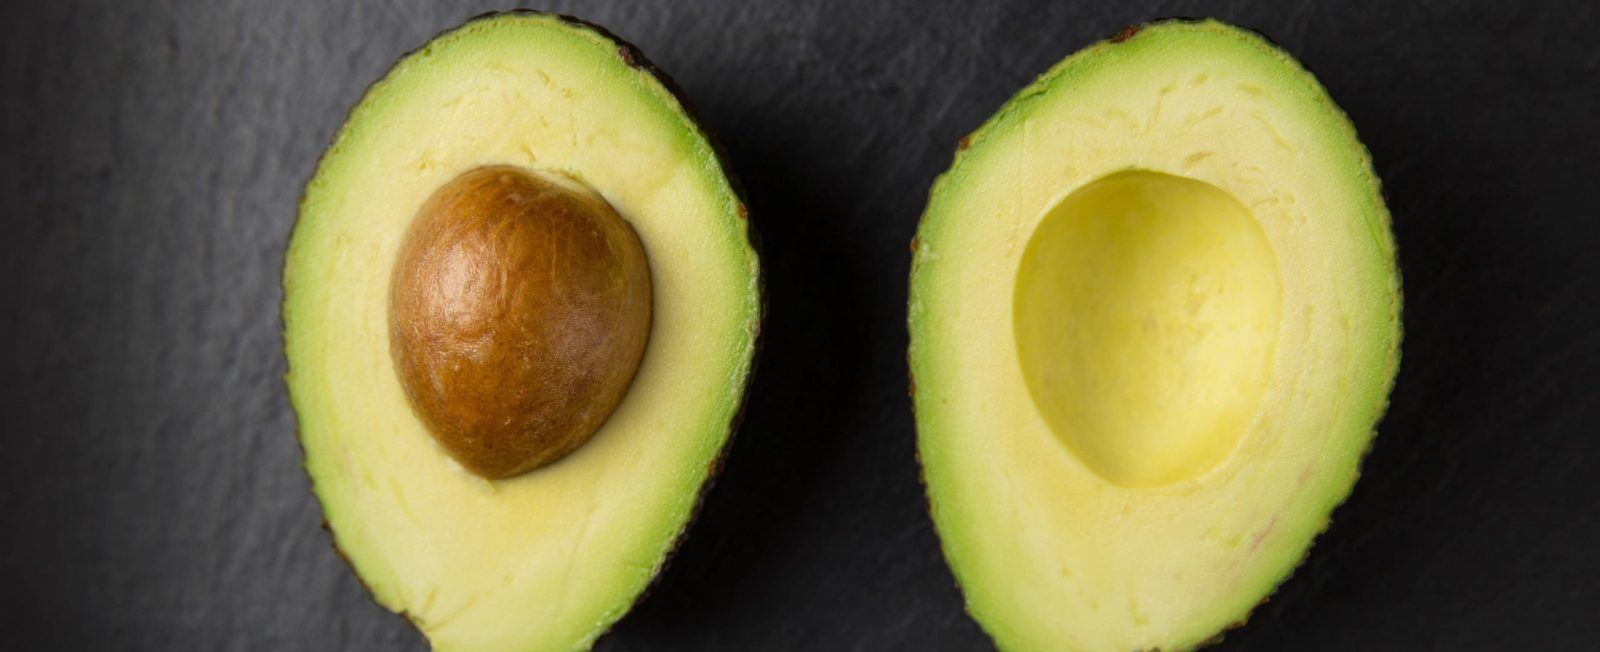 Avocado: All the health benefits you can reap from this nutritious fruit